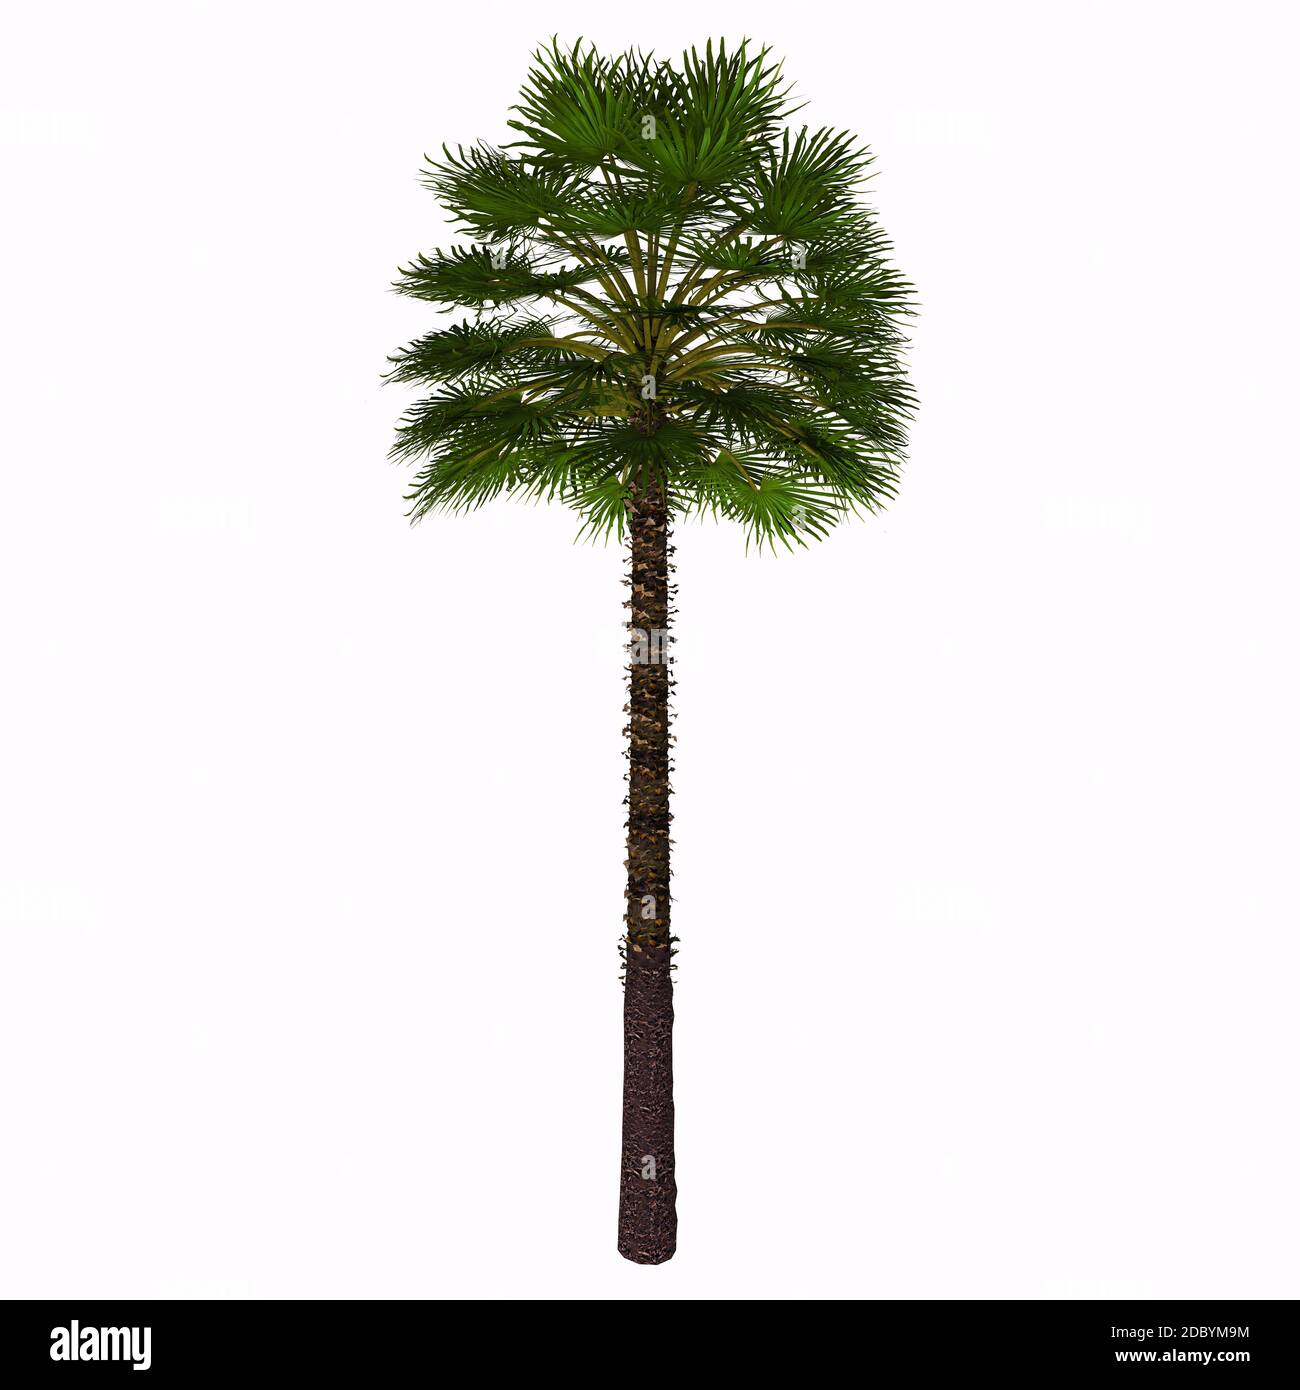 This palm is often found as a thick shrub, with an height of about 2-3 meters. Only occasionally it can grow higher up to 7 meters, and that’s when it Stock Photo